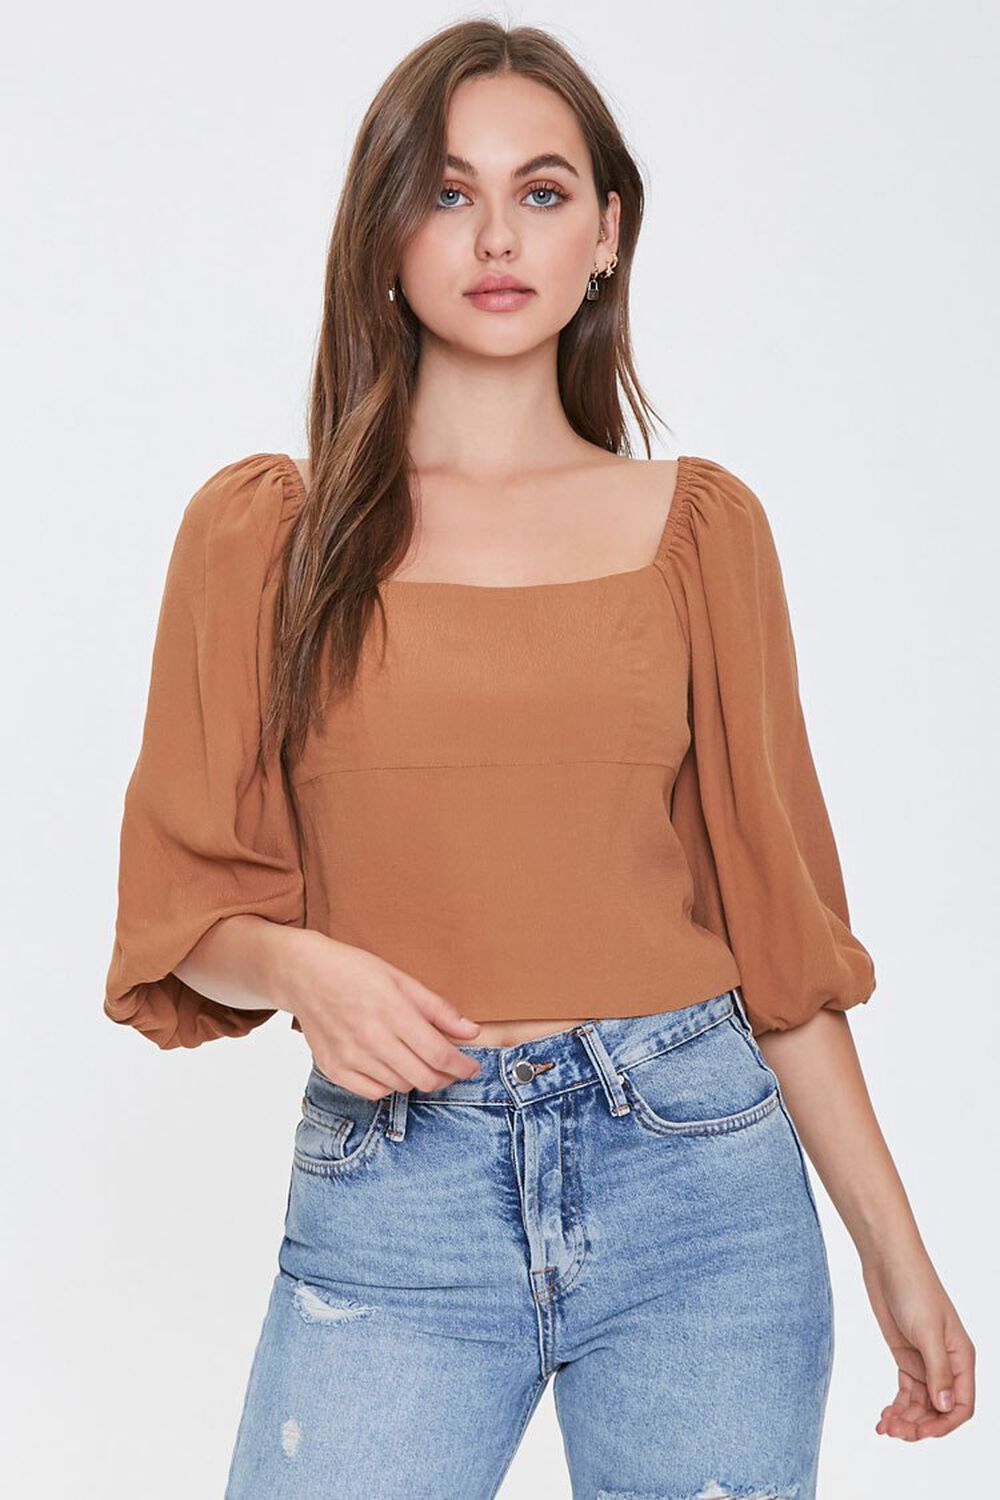 COCOA Lace-Back Peasant Top, image 1